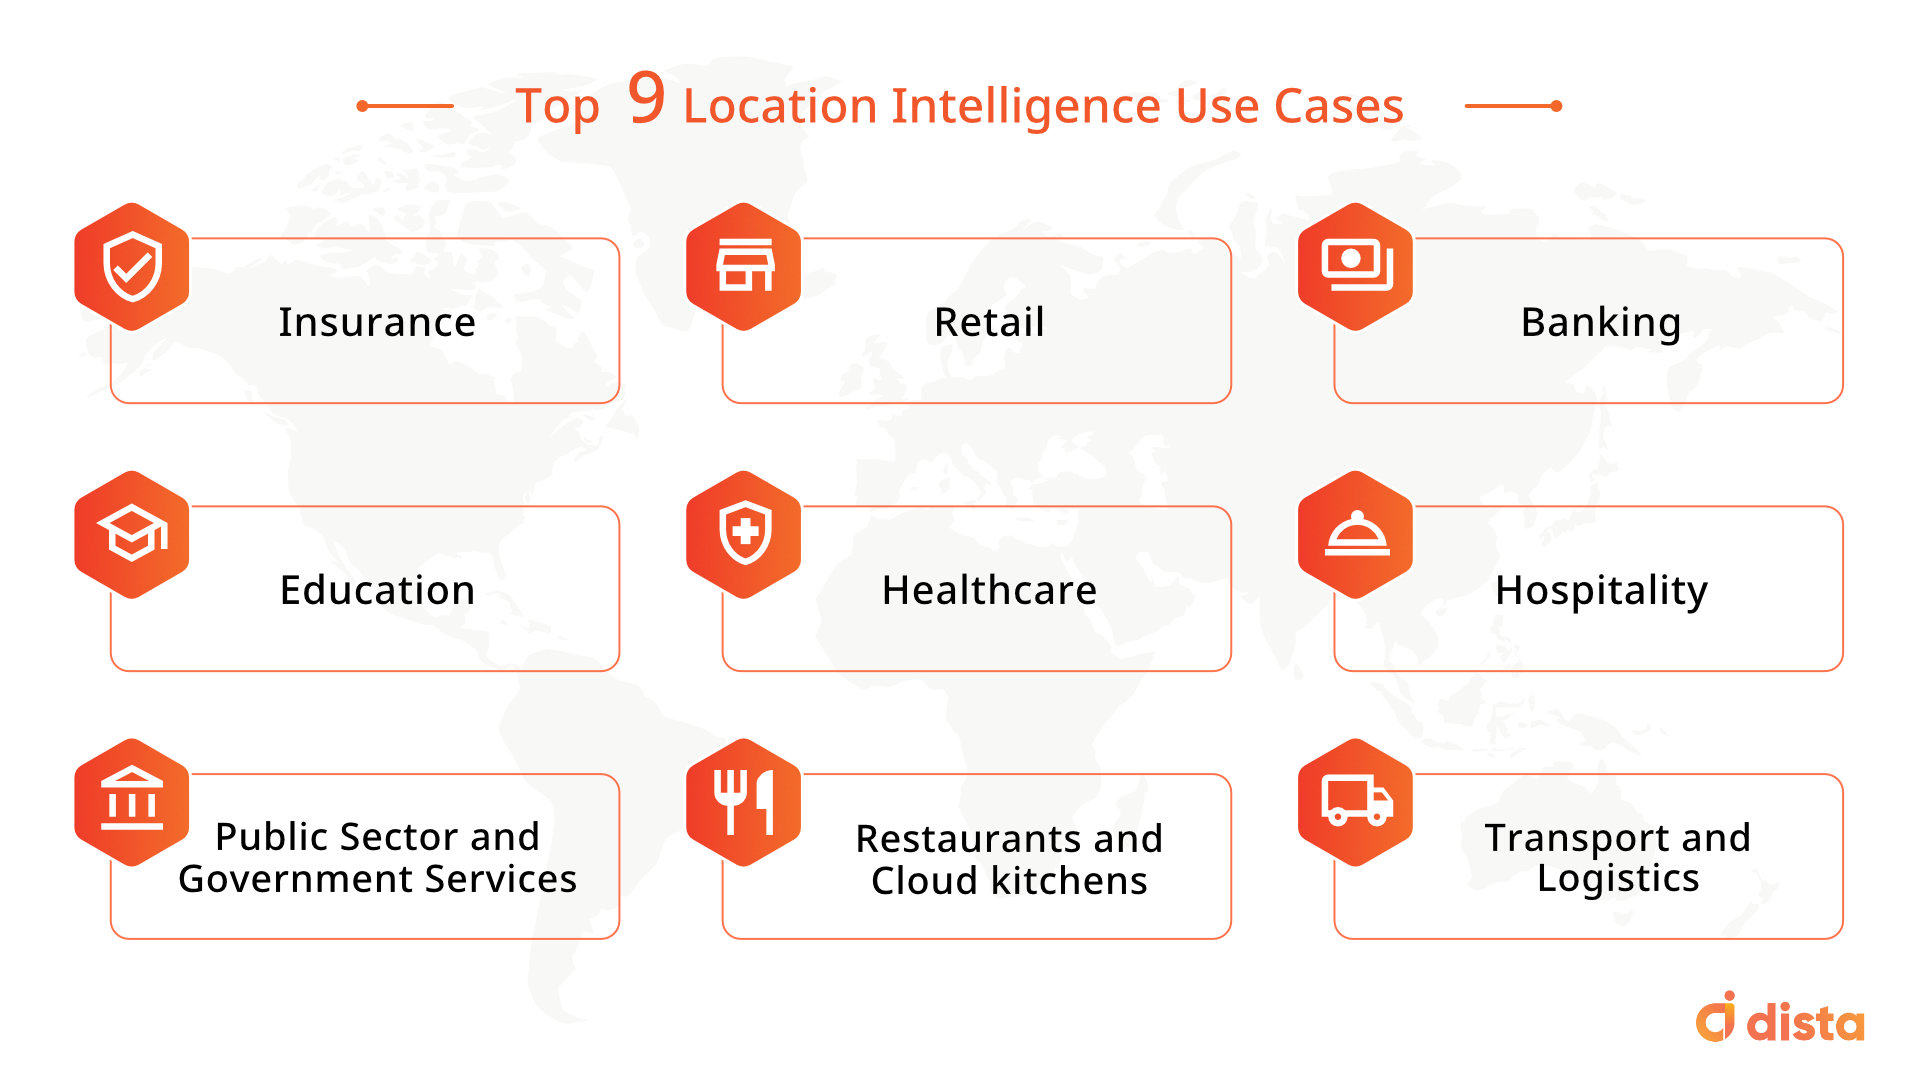 Top 9 Location Intelligence Use Cases